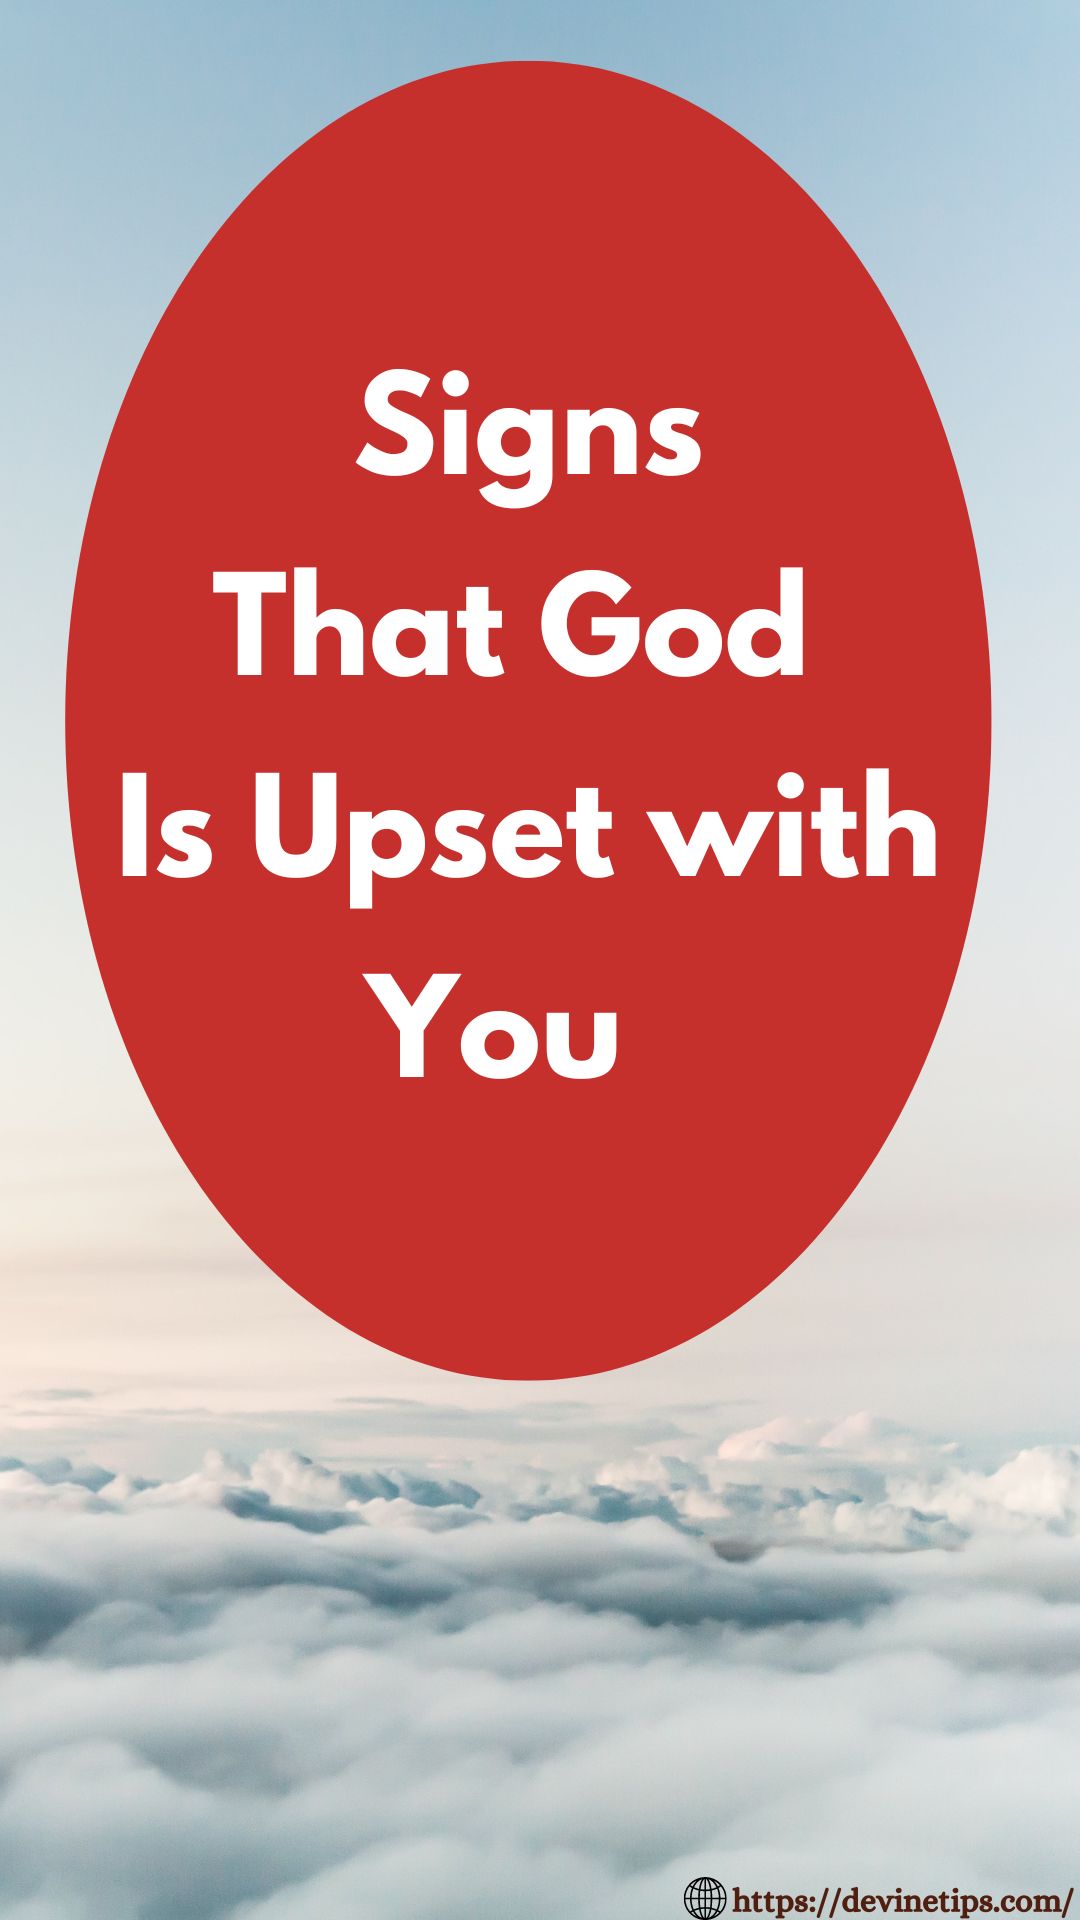 Signs that God is upset with you